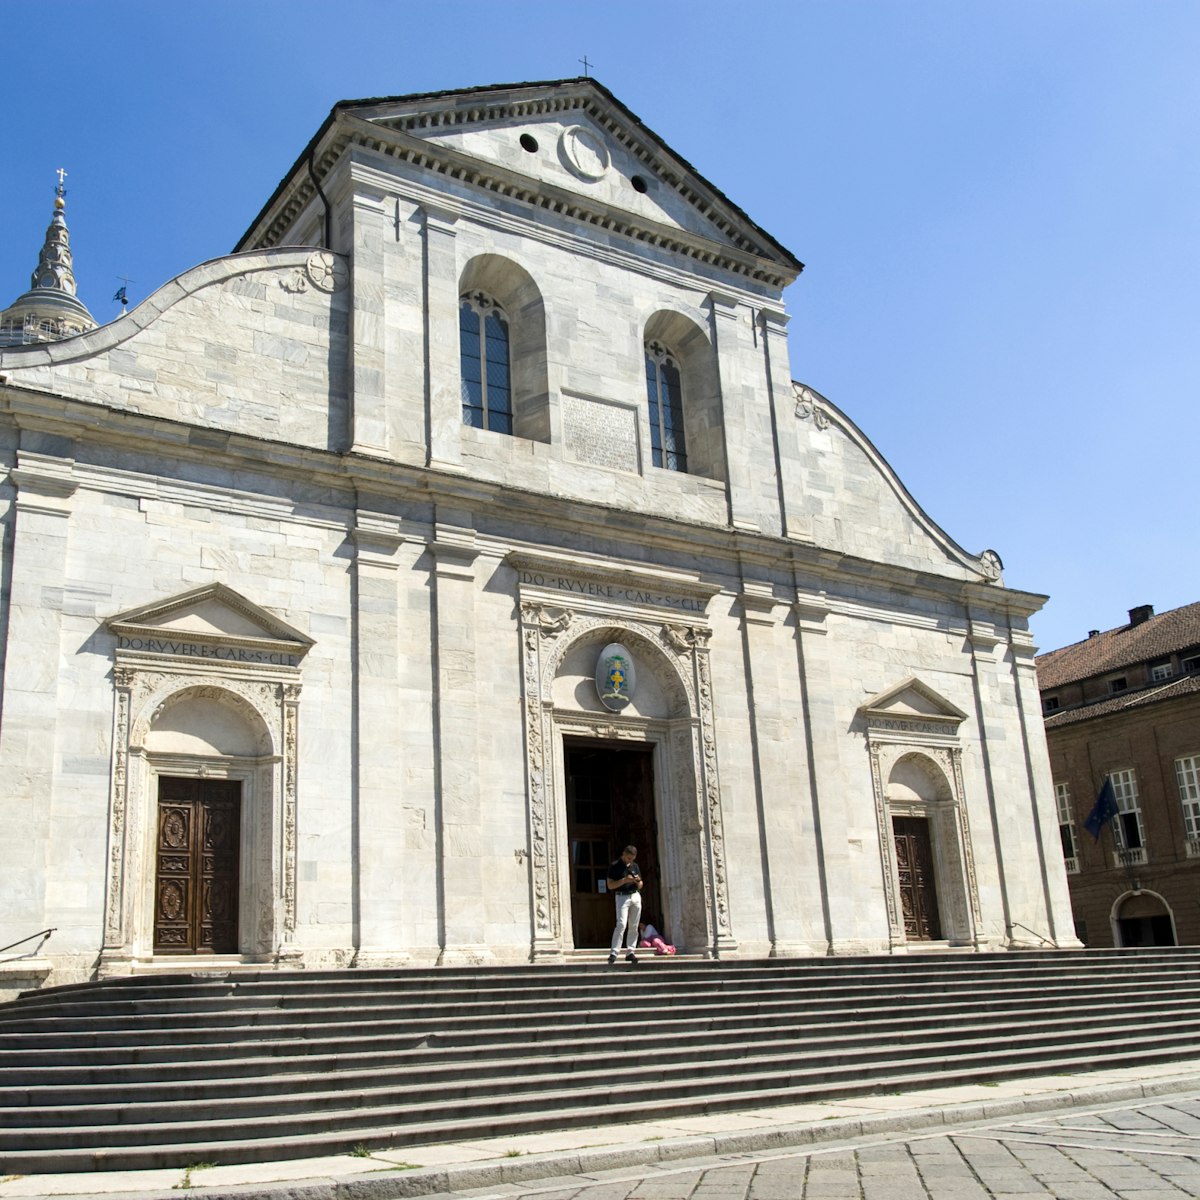 Cathedral of Saint John the Baptist in Turin; Shutterstock ID 156867308; Your name (First / Last): Anna Tyler; GL account no.: 65050; Netsuite department name: Online Editorial; Full Product or Project name including edition: destination-image-southern-europe